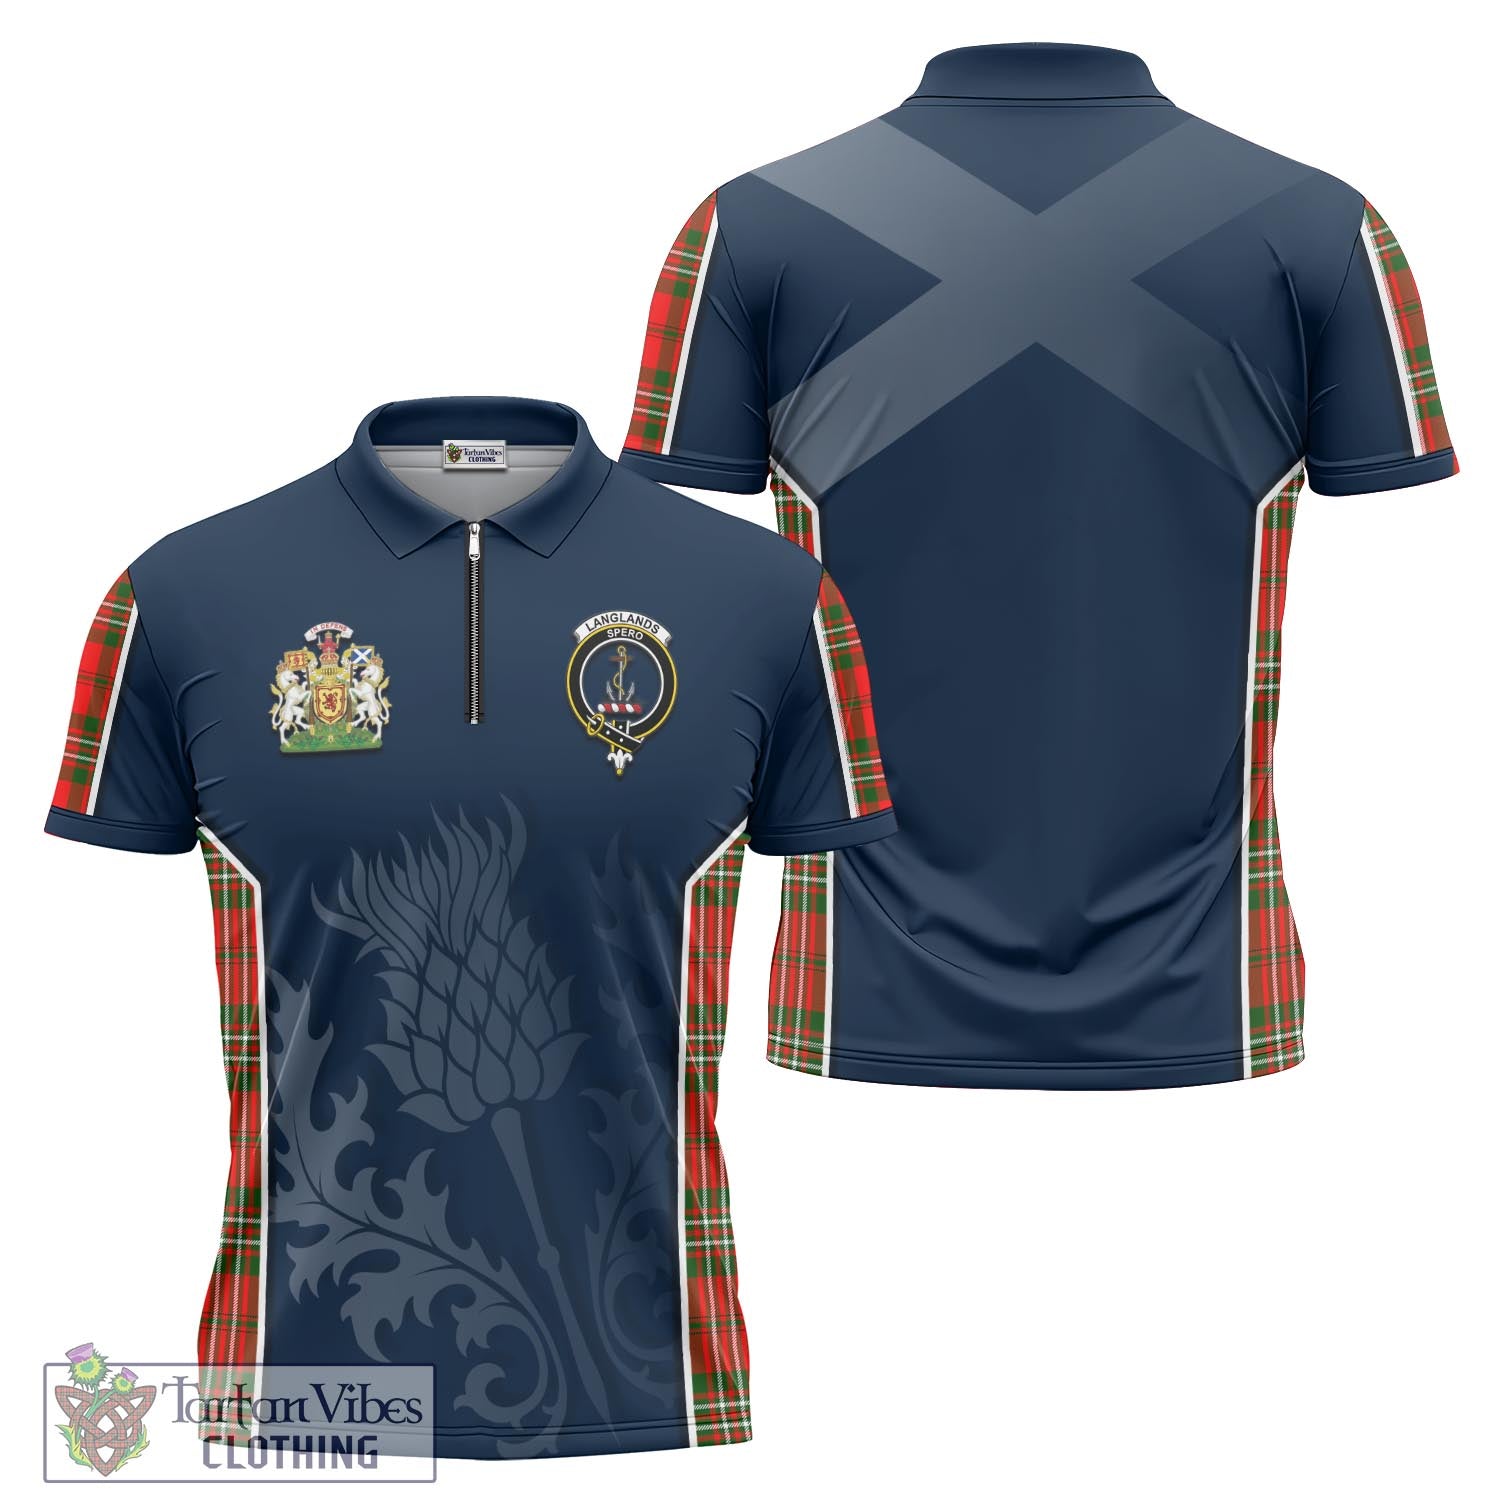 Tartan Vibes Clothing Langlands Tartan Zipper Polo Shirt with Family Crest and Scottish Thistle Vibes Sport Style